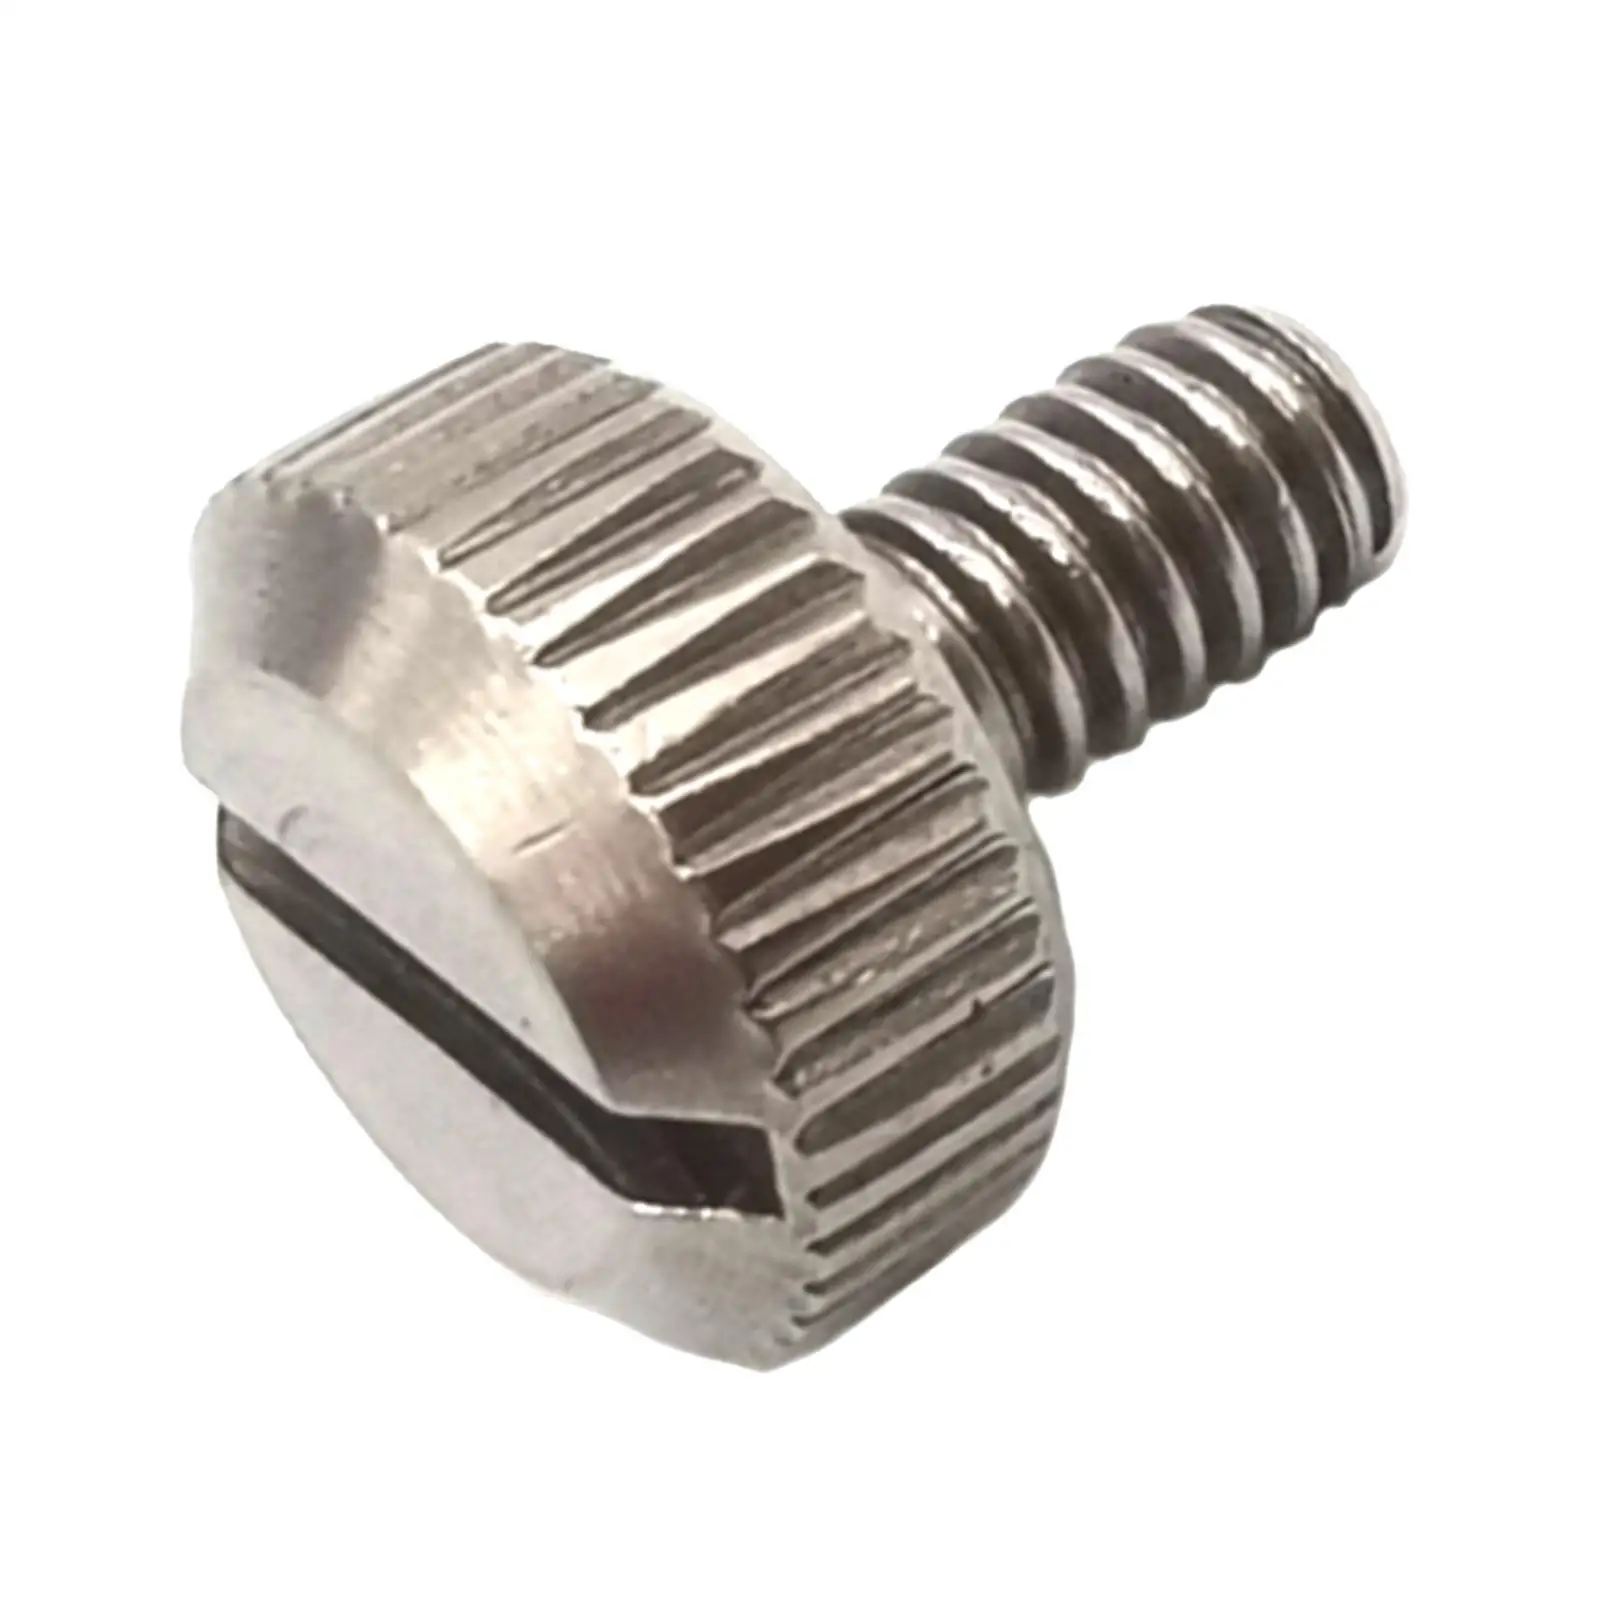 Seat Bolt Mount 6mm Screw for Touring Replacement Part